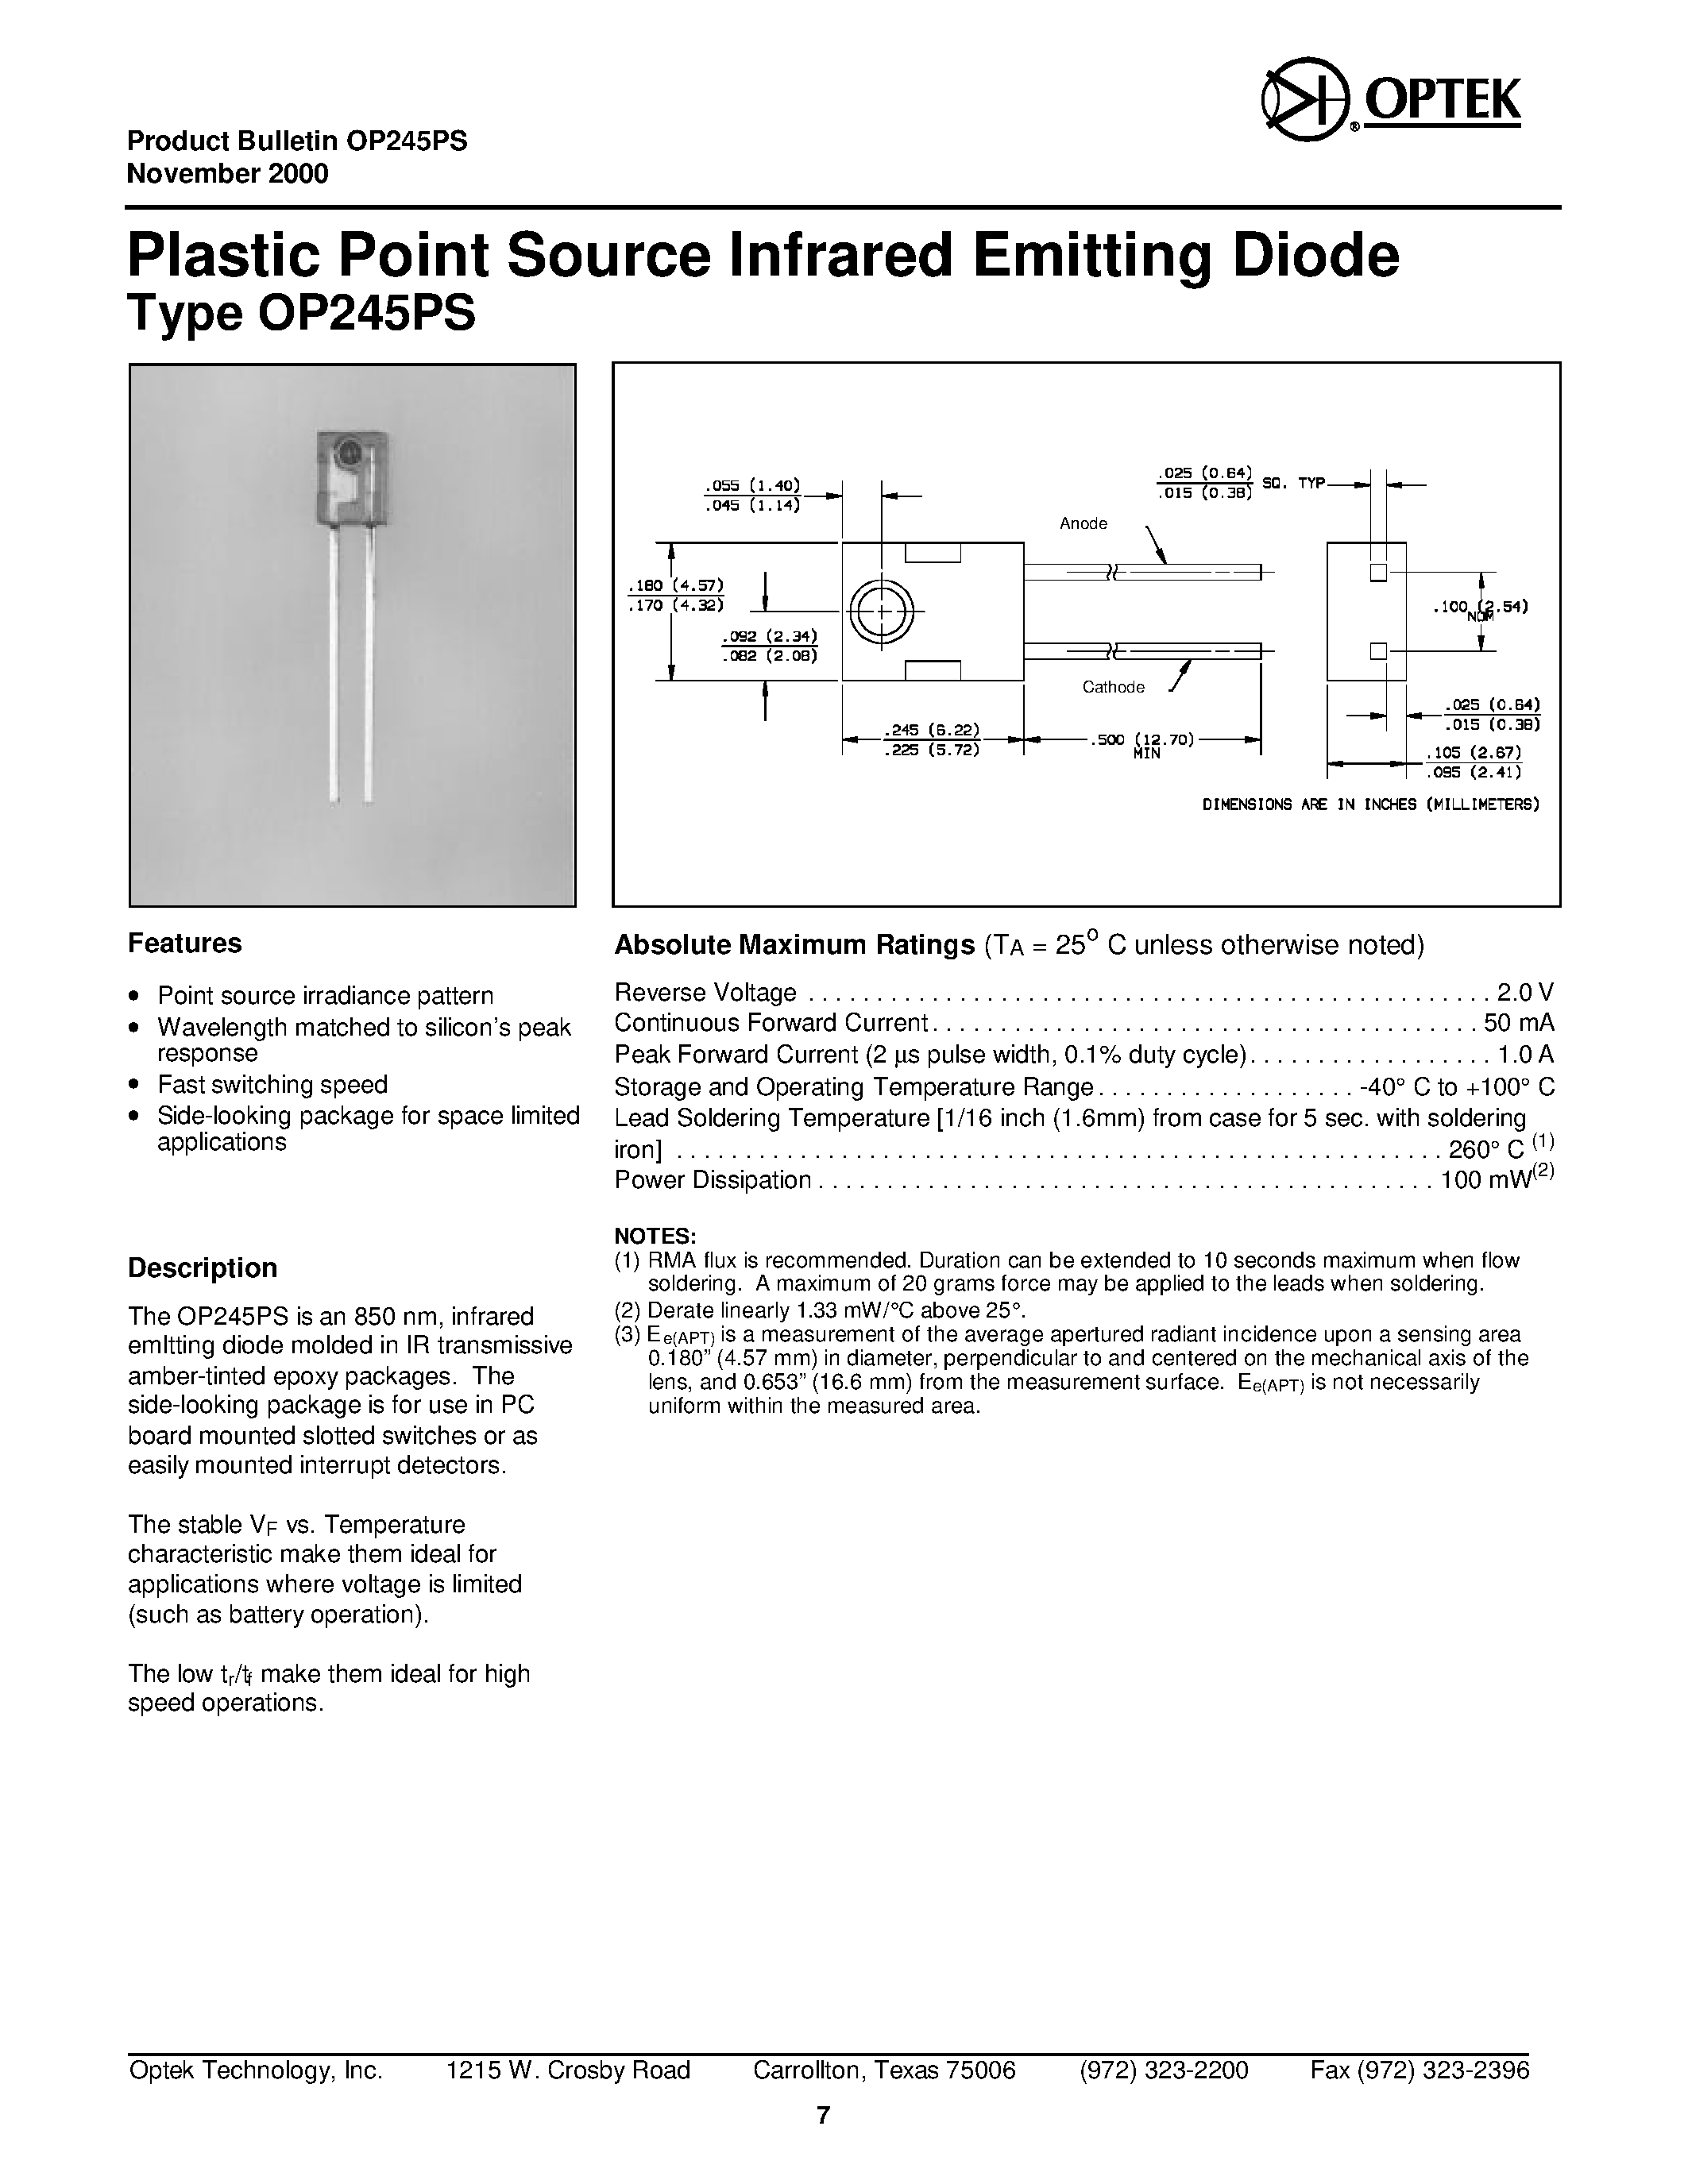 Datasheet OP245PS - Plastic Point Source In fra red Emitting Diode page 1